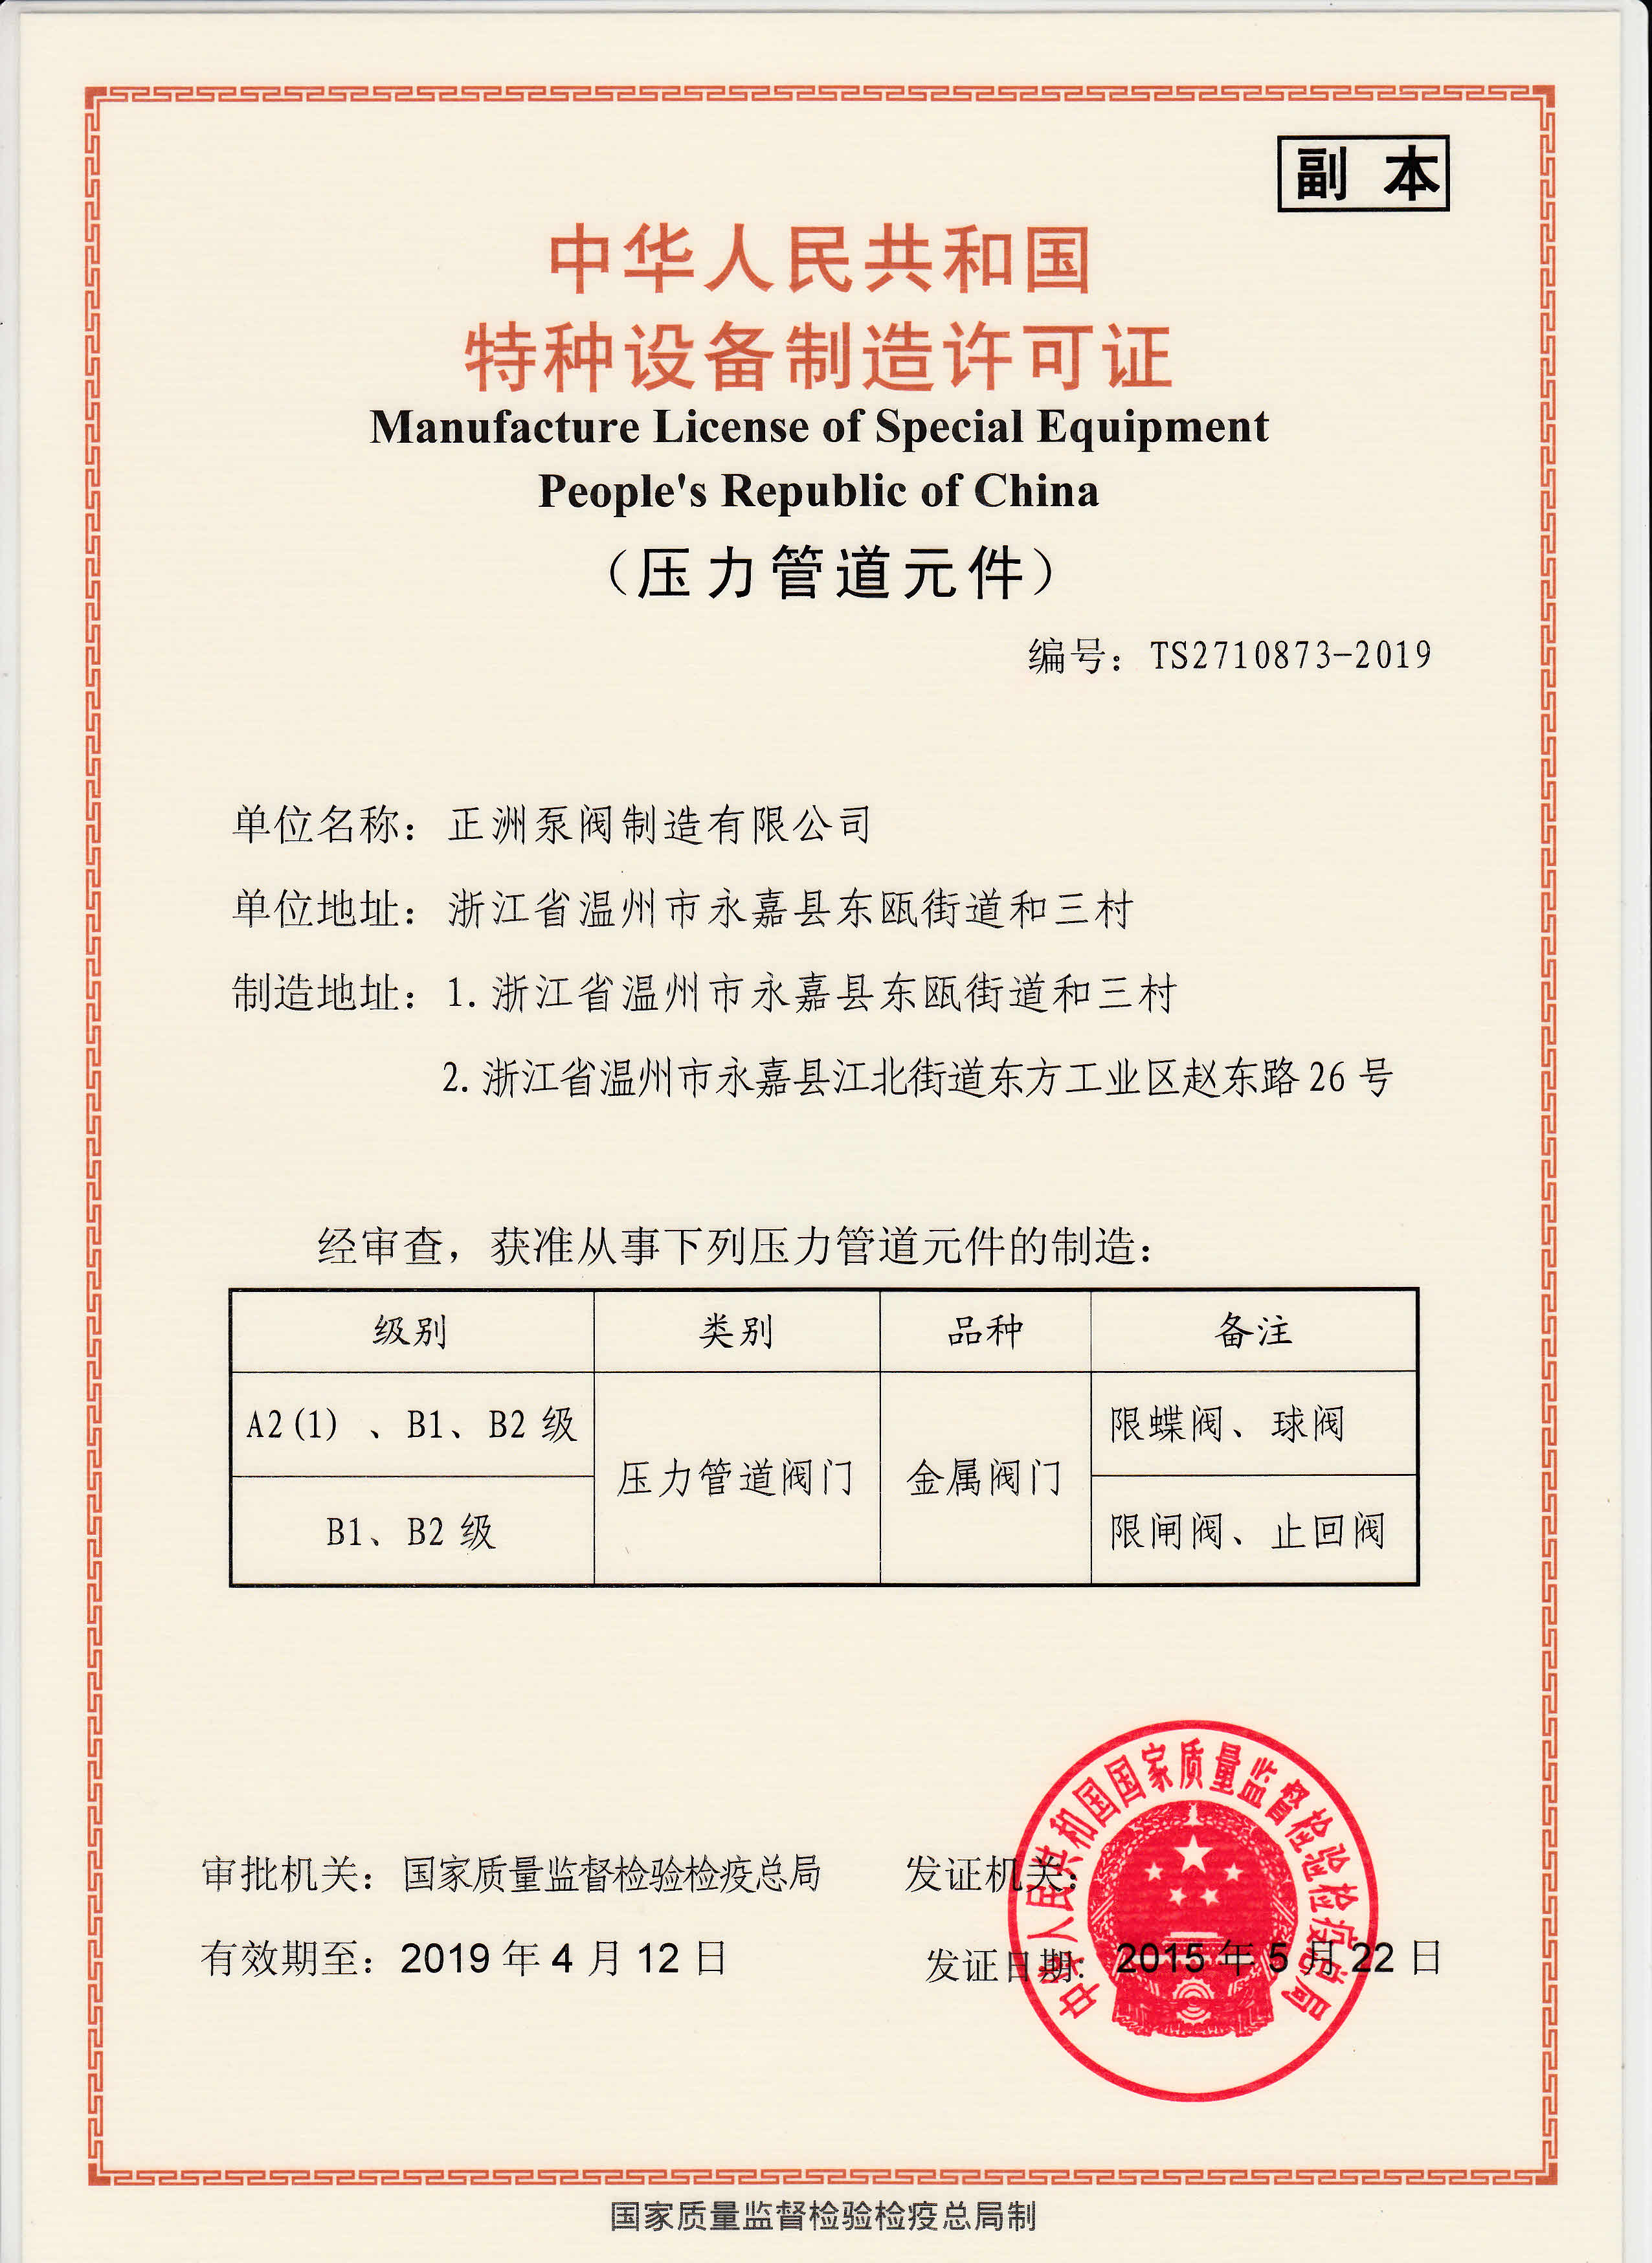 TS manufacture license of special equipment